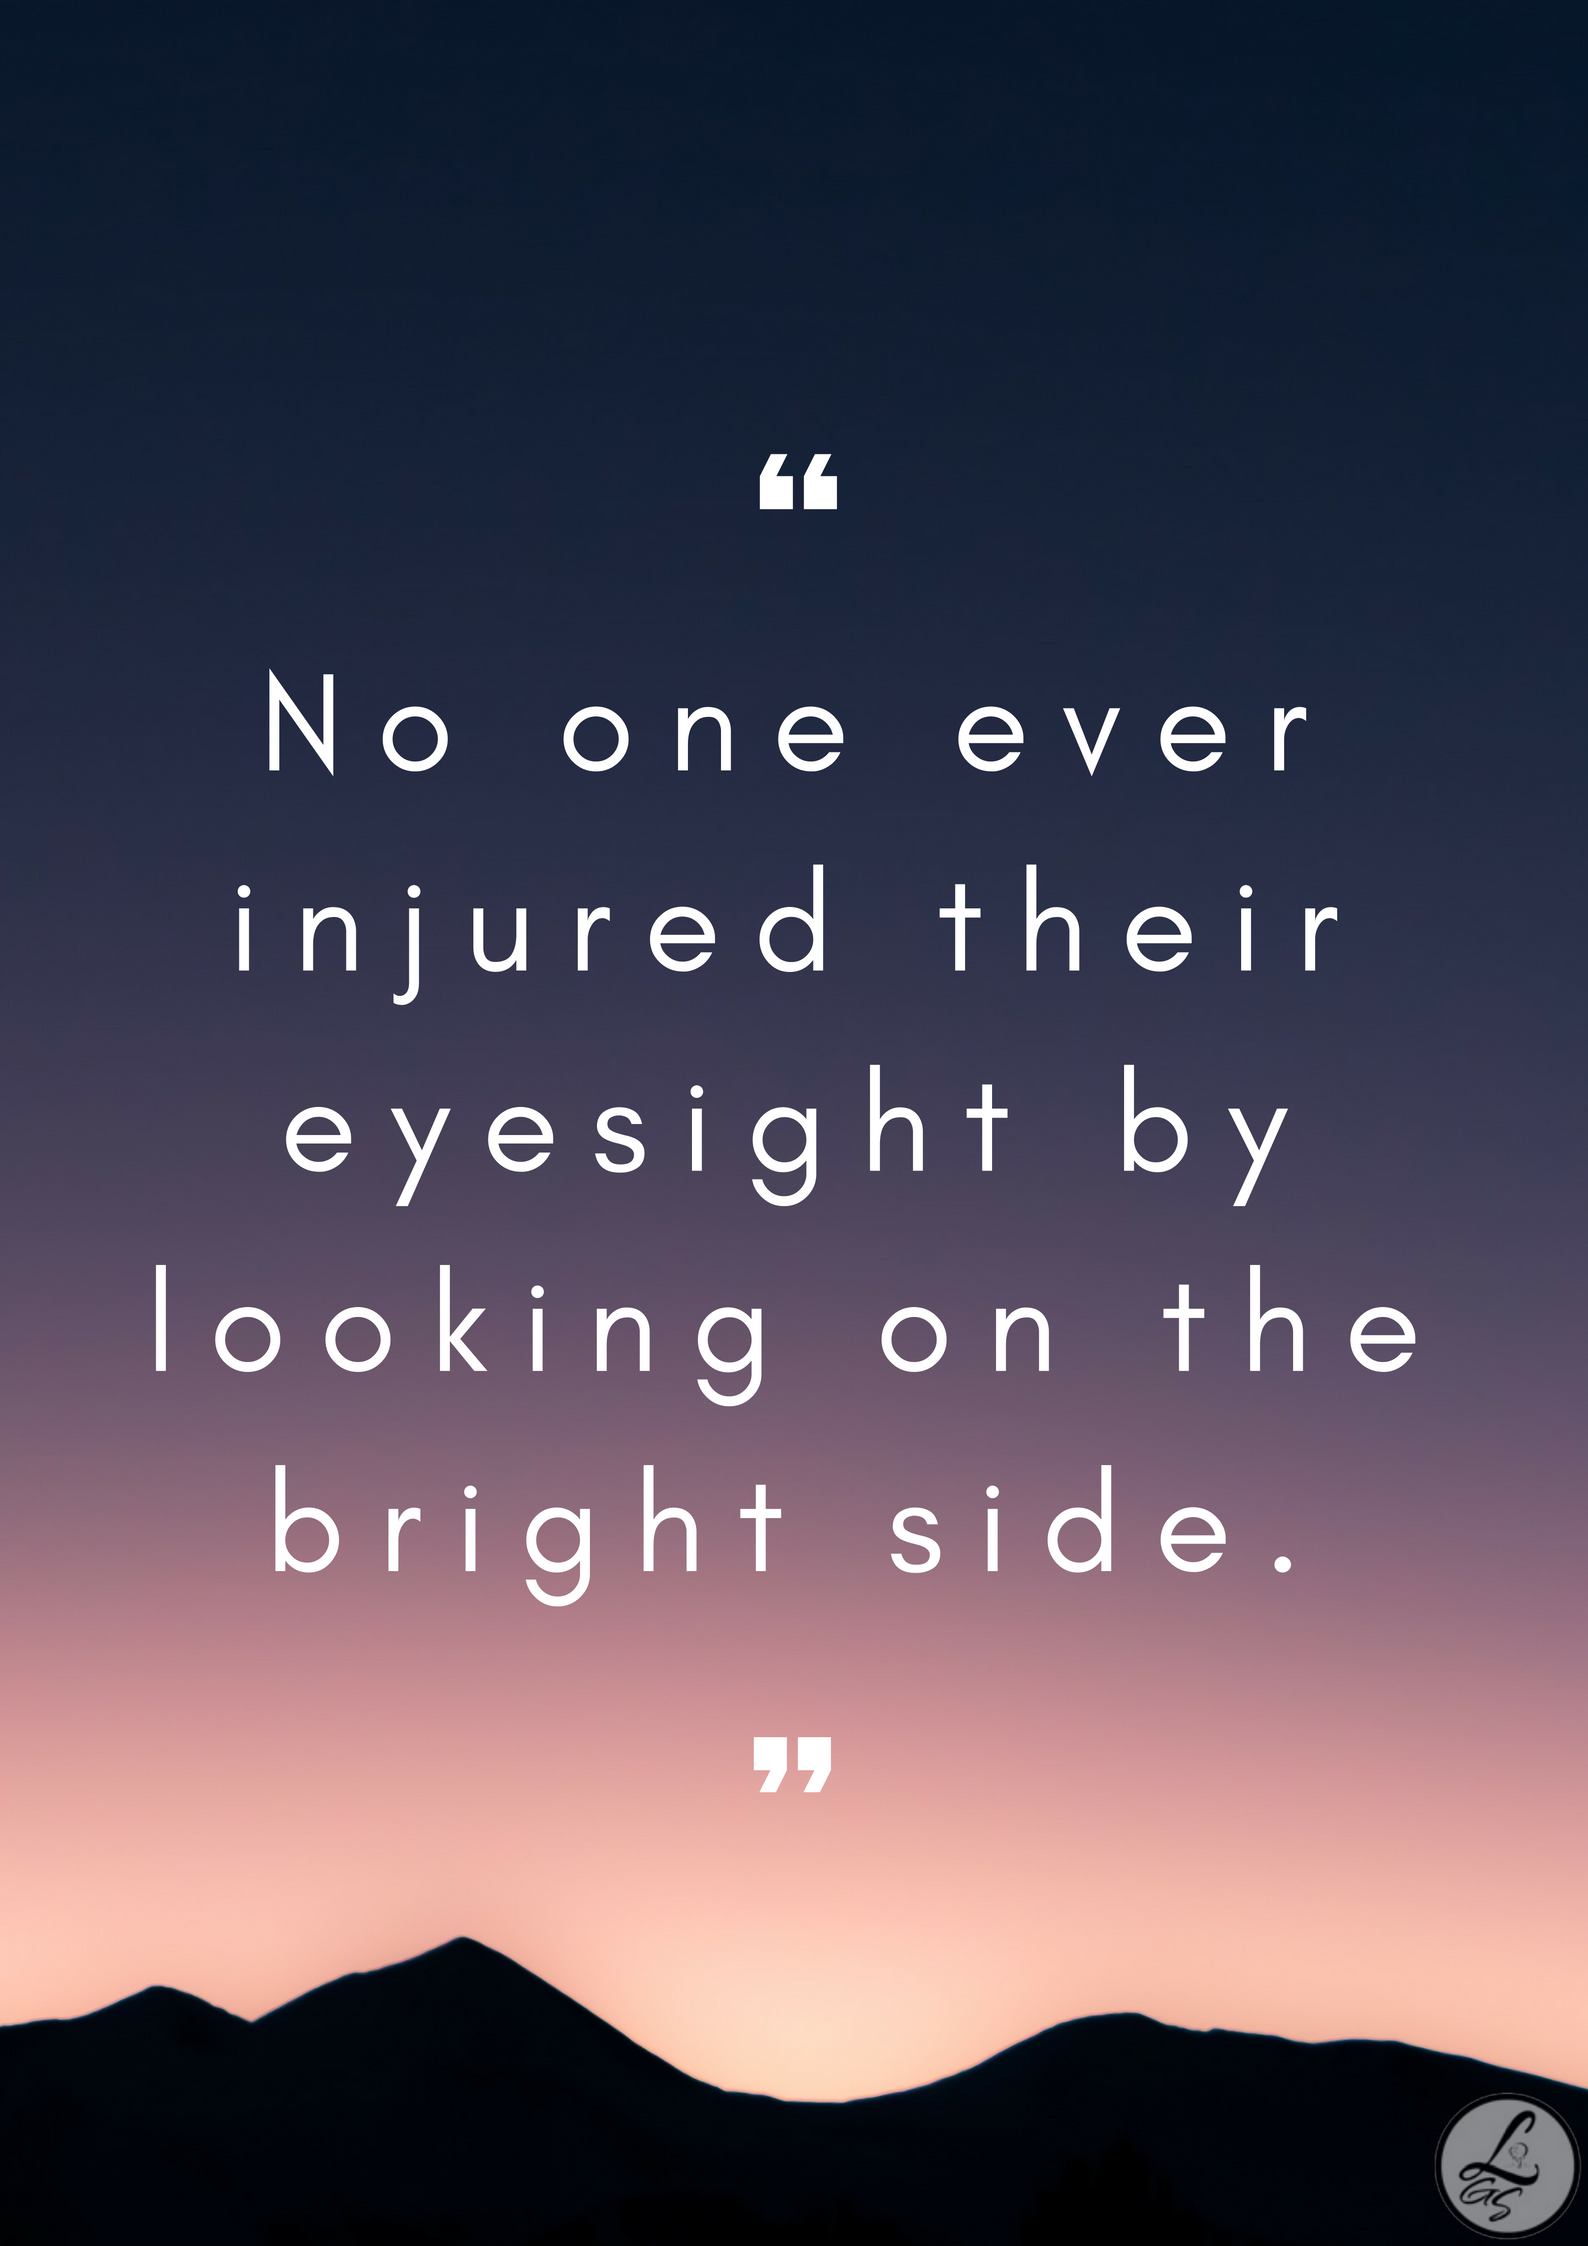 No one ever imjured their eyesight by looking on the bright side.